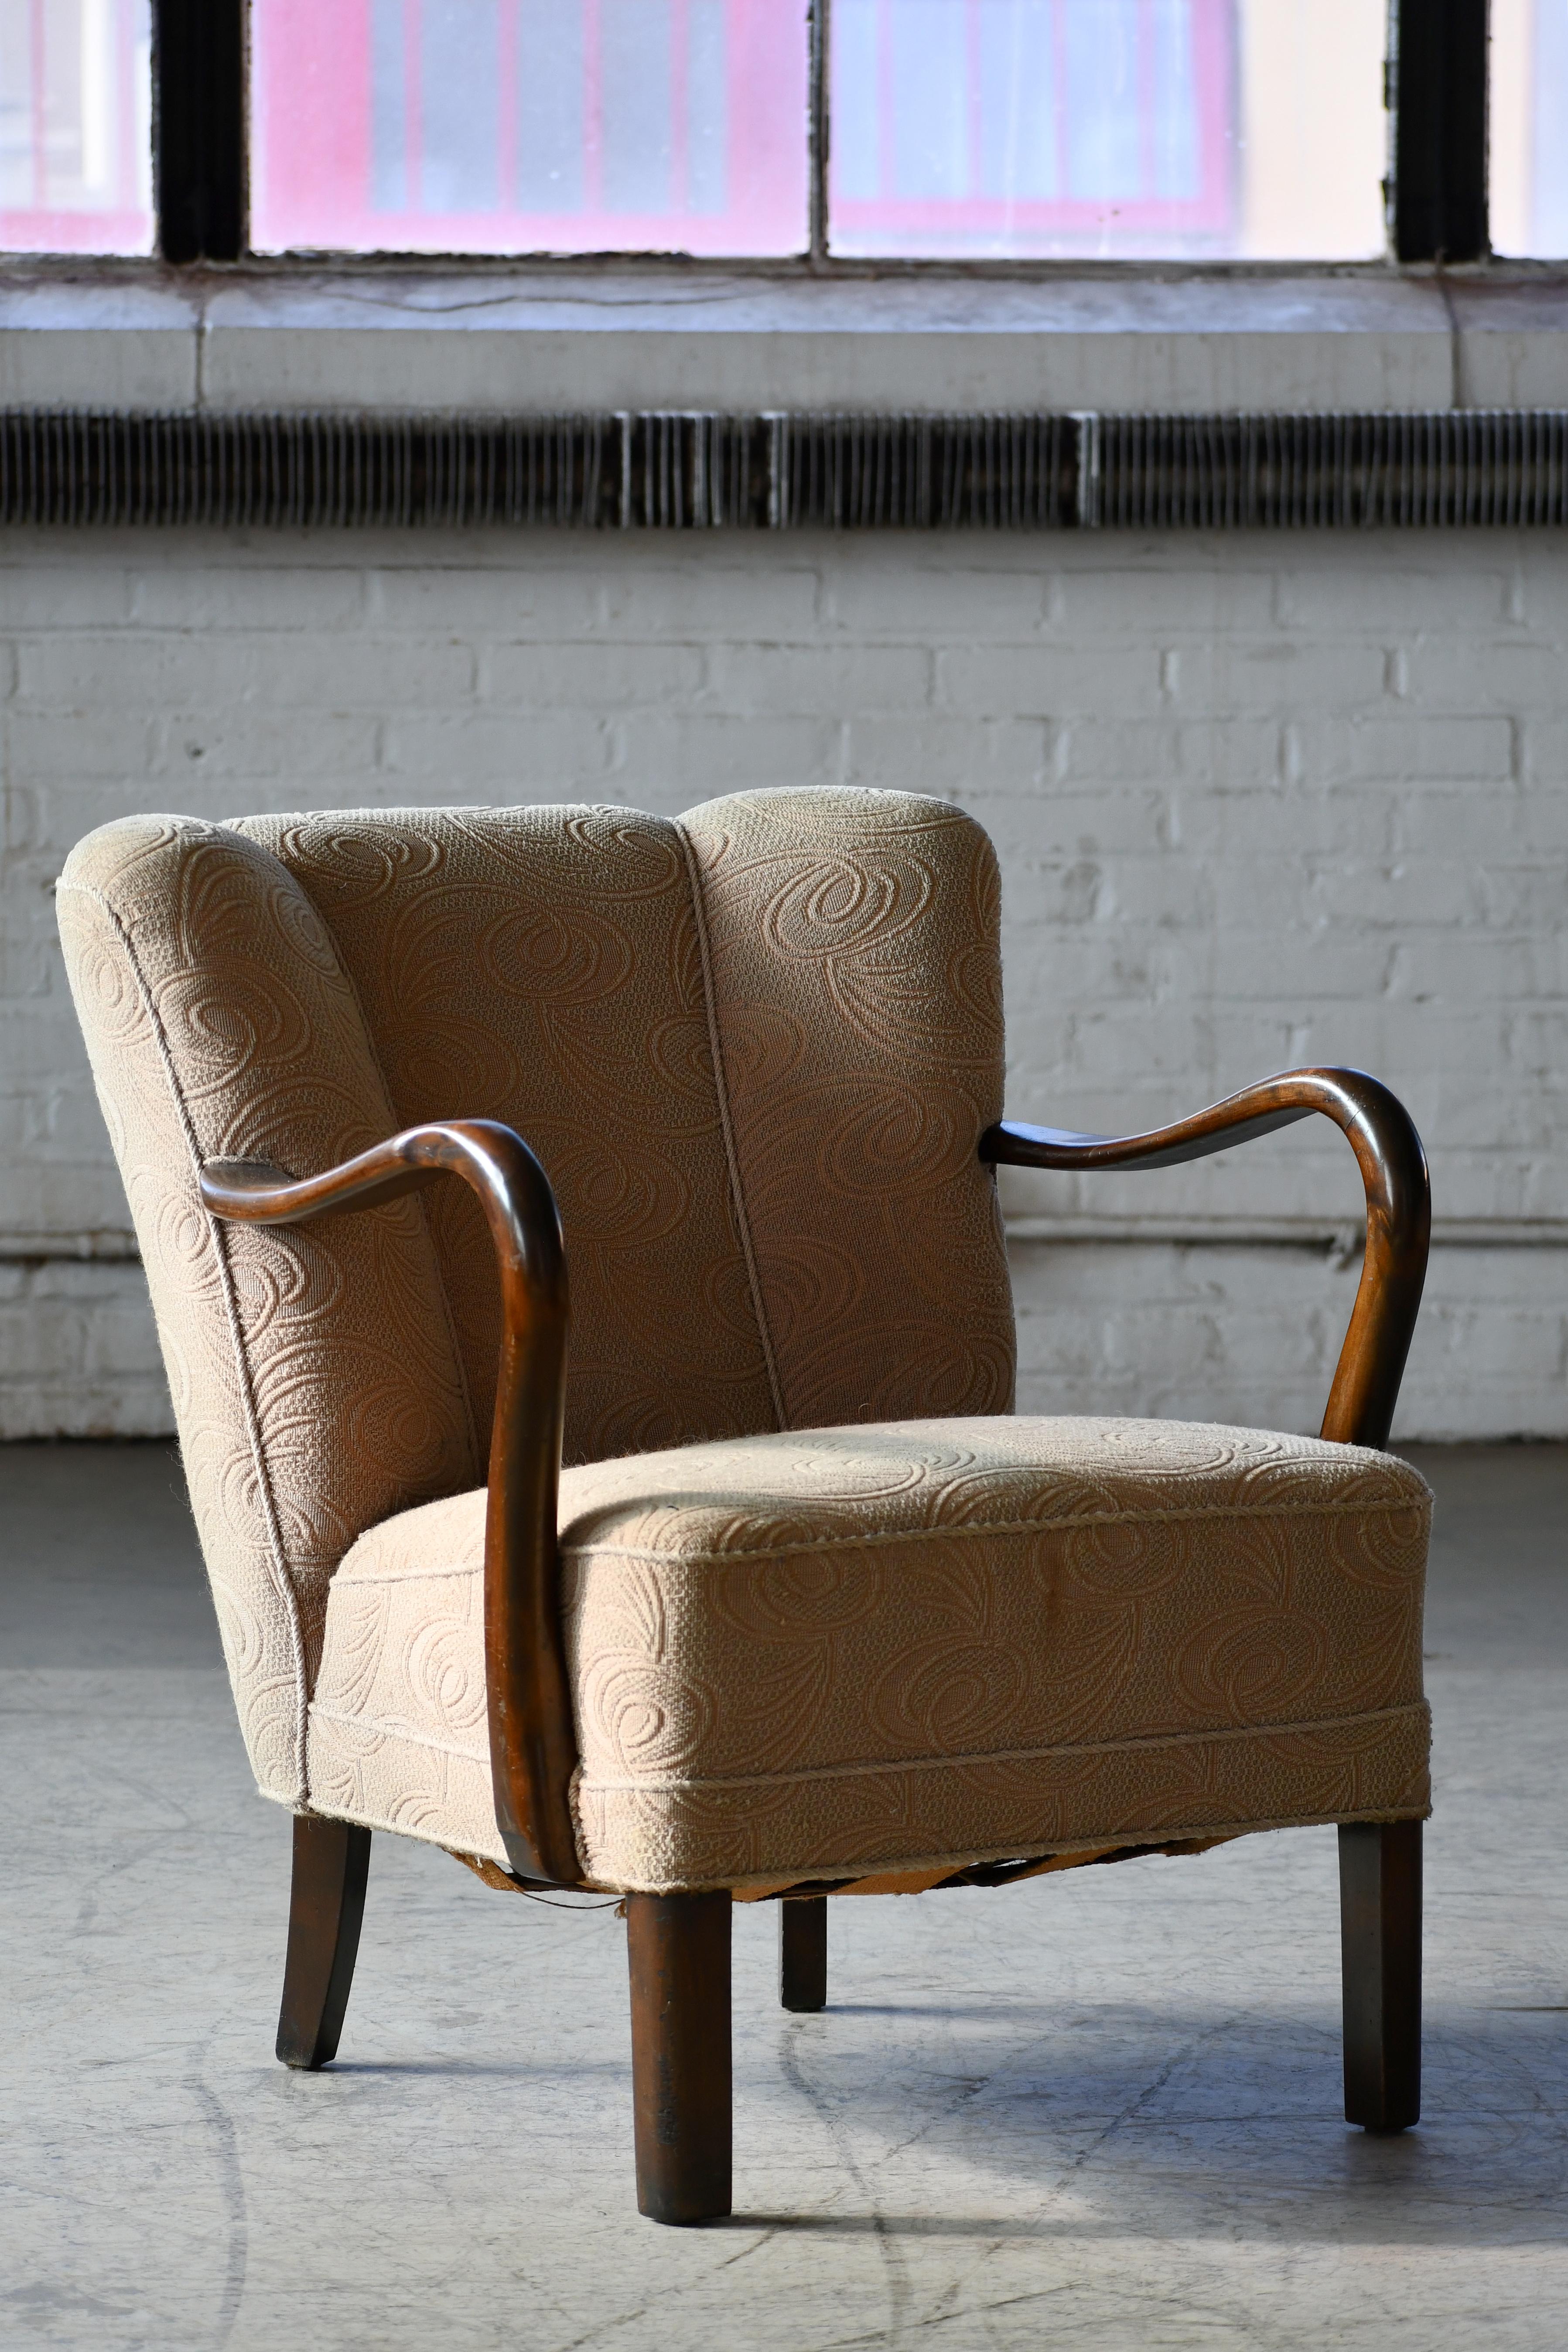 Scandinavian Modern Danish Easy Chair with Open Armrests by Alfred Christensen, 1940's For Sale